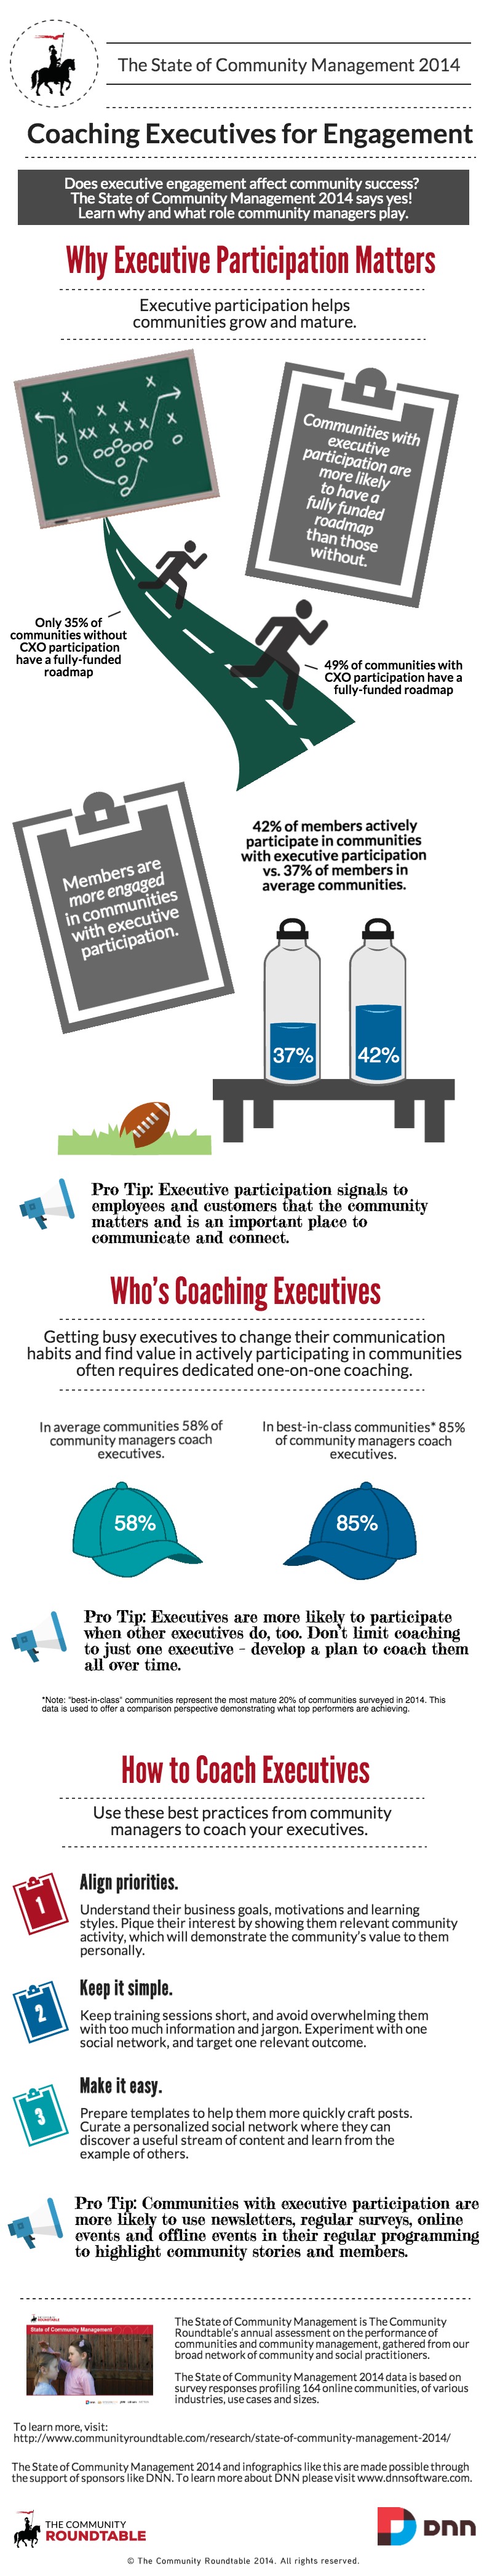 Infographic-Executives and Online Communities_Final